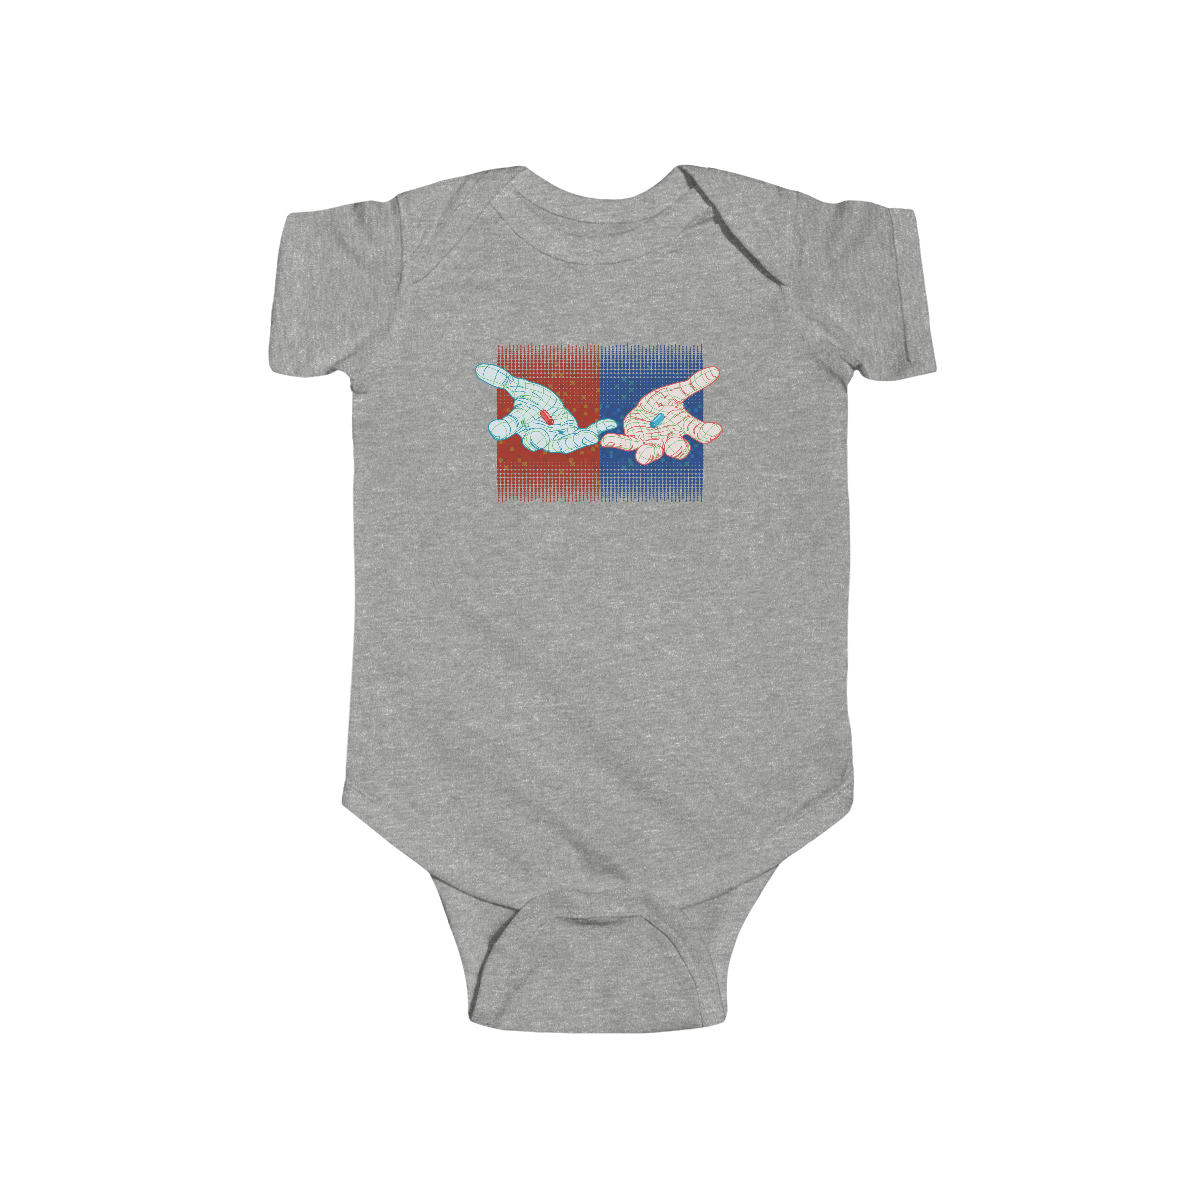 Two Hands (red & blue) - Infant Fine Jersey Bodysuit